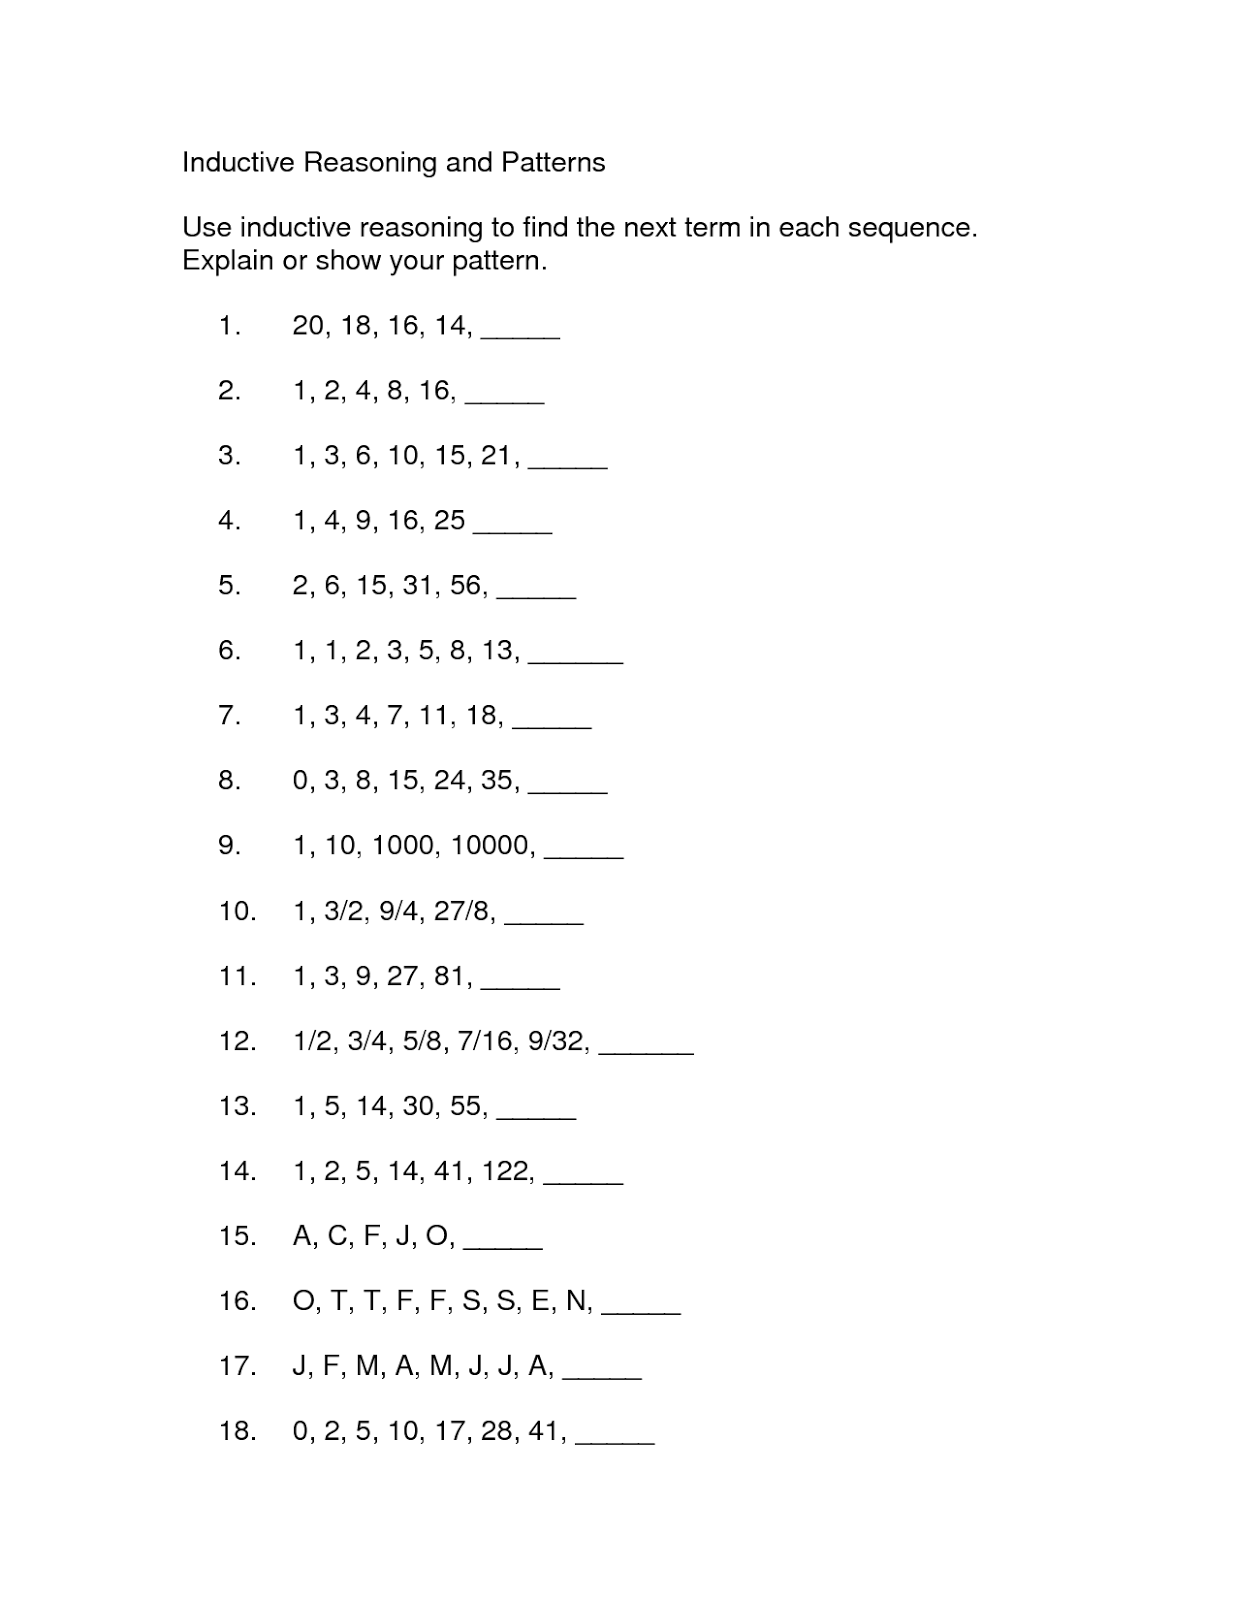 11th-grade-math-worksheets-printable-learning-how-to-read-10-best-images-of-11th-grade-math